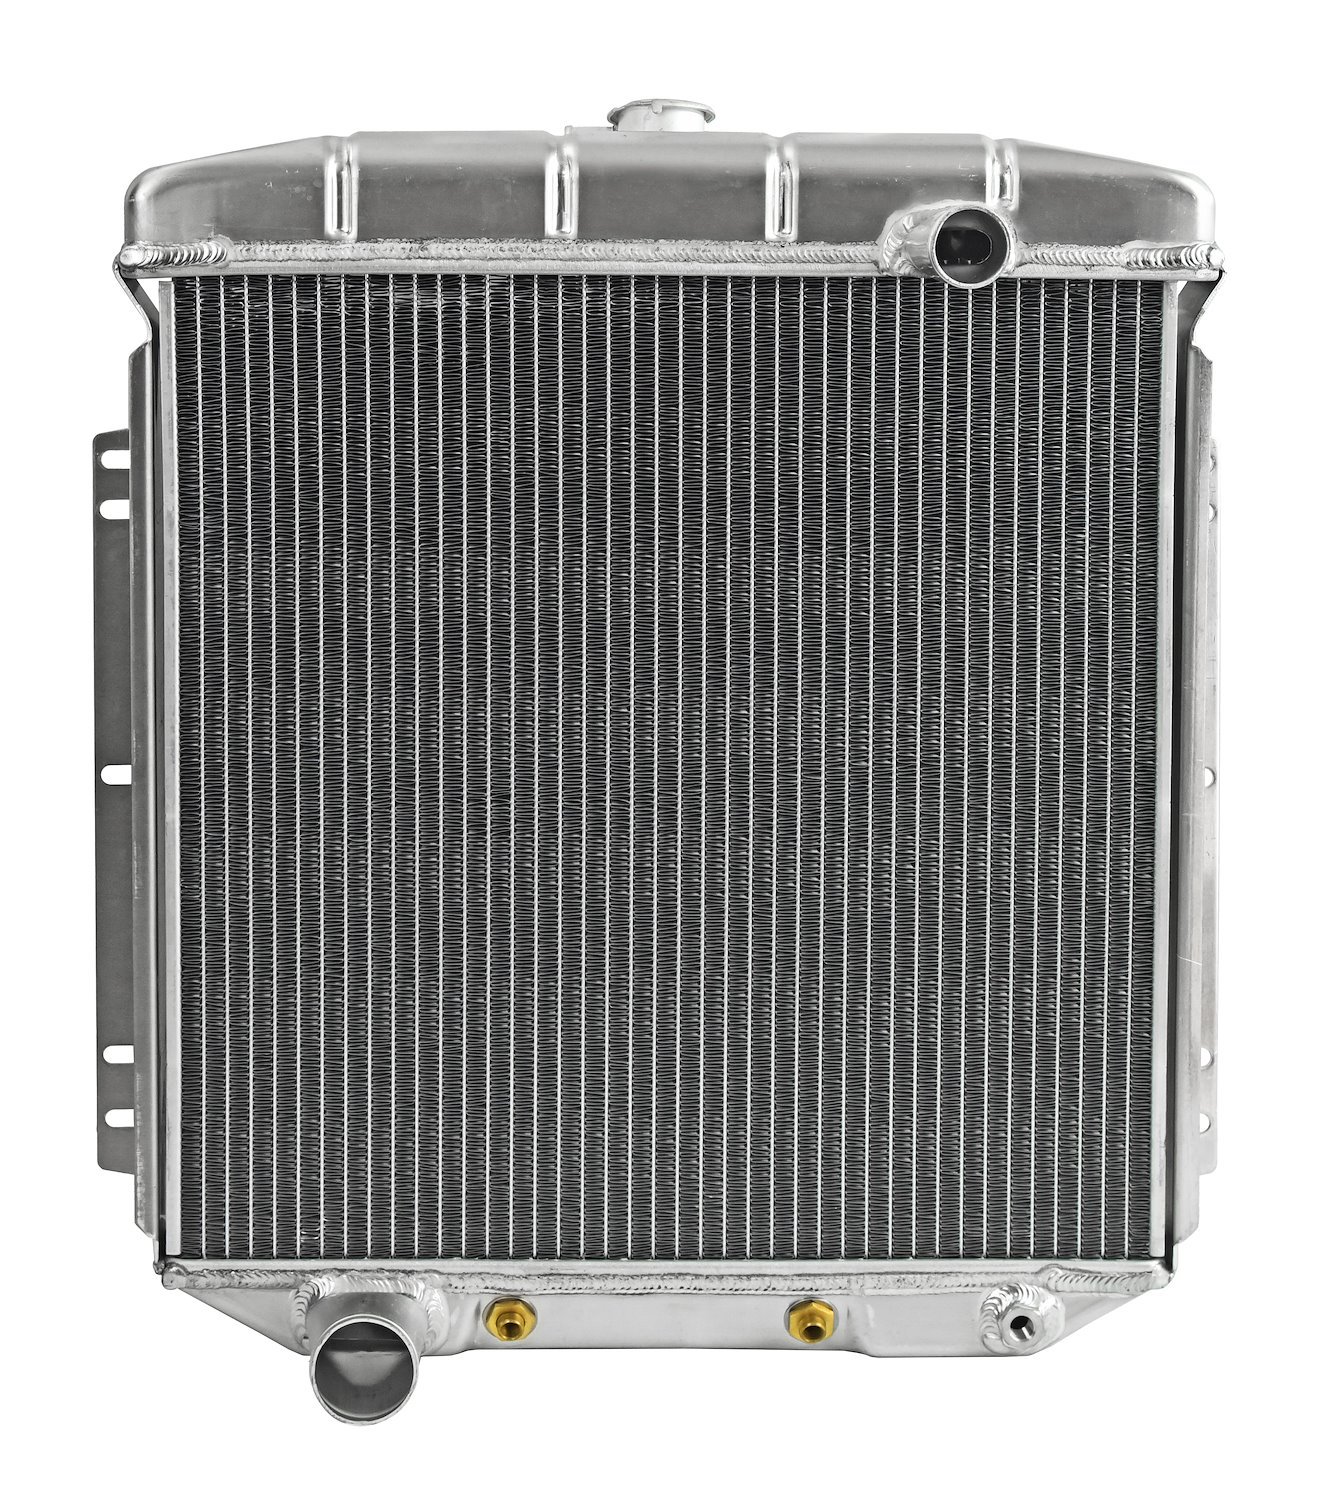 Reproduction Aluminum Radiator for Select 1954-1956 Ford